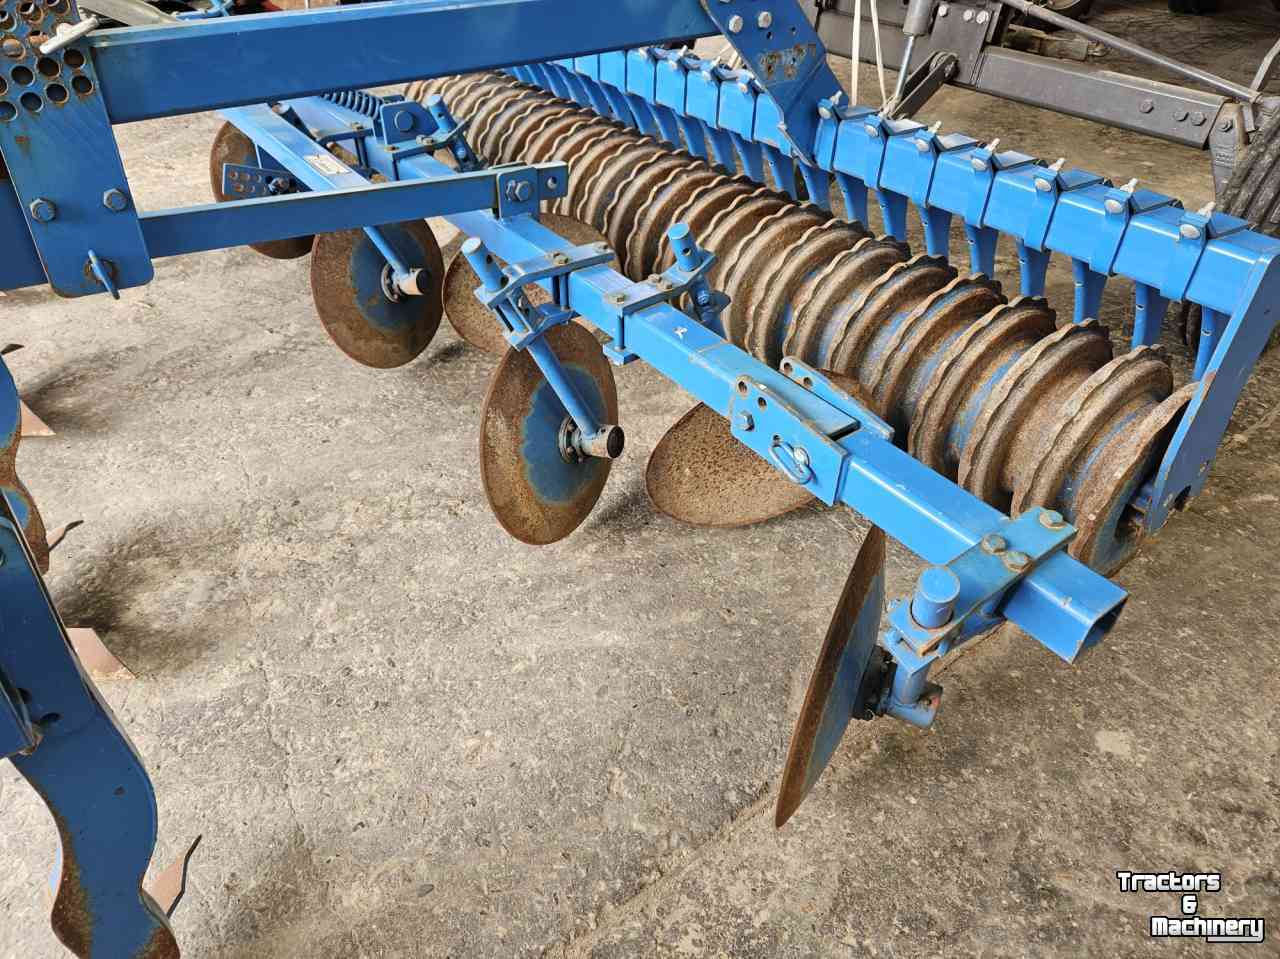 Cultivateur Rabe GN-3000 cultivator